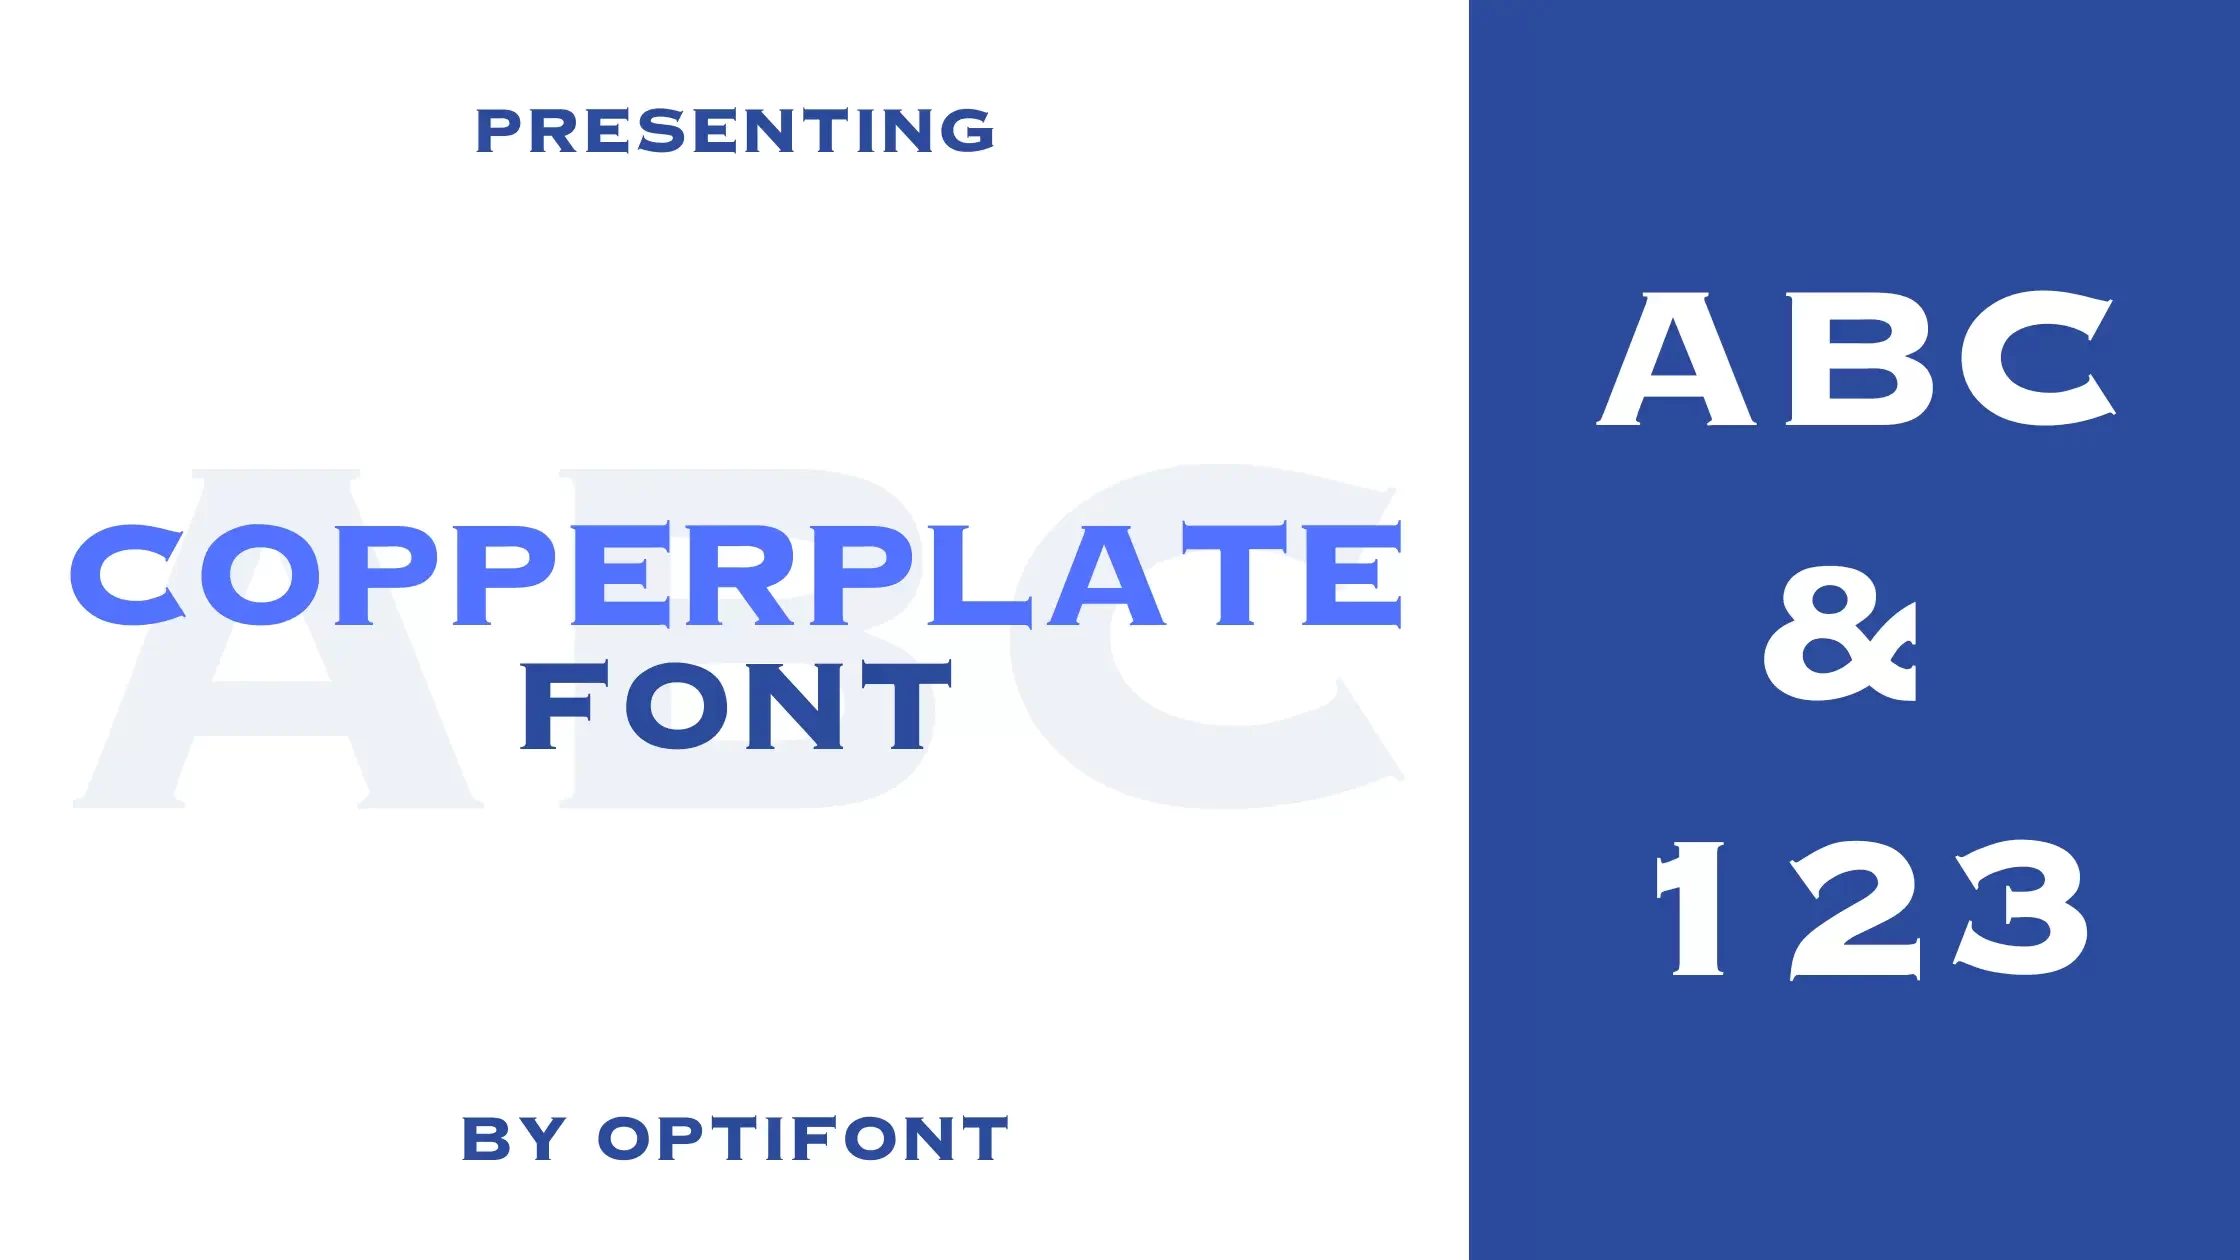 Copperplate font